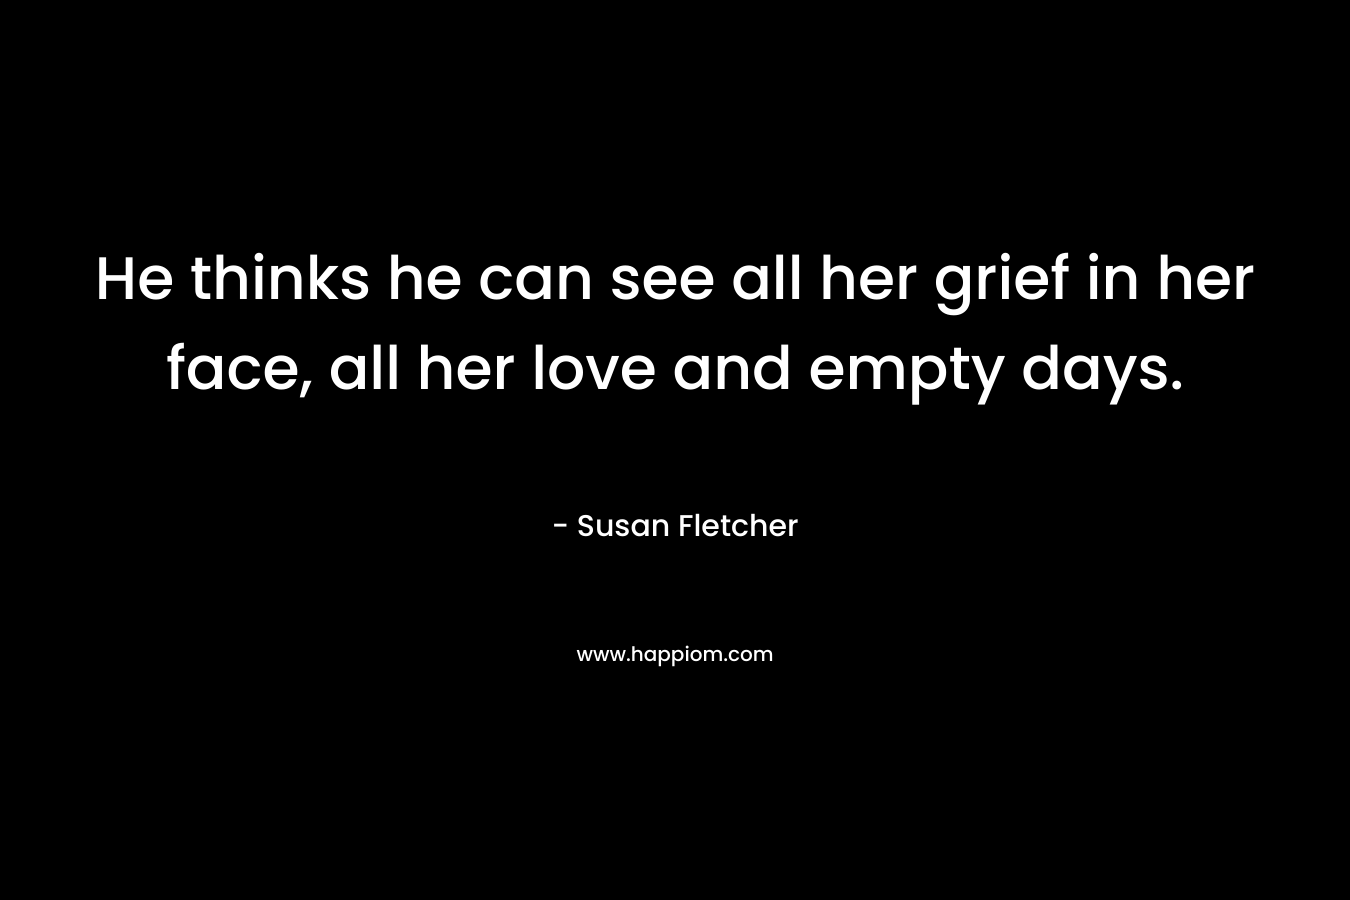 He thinks he can see all her grief in her face, all her love and empty days.